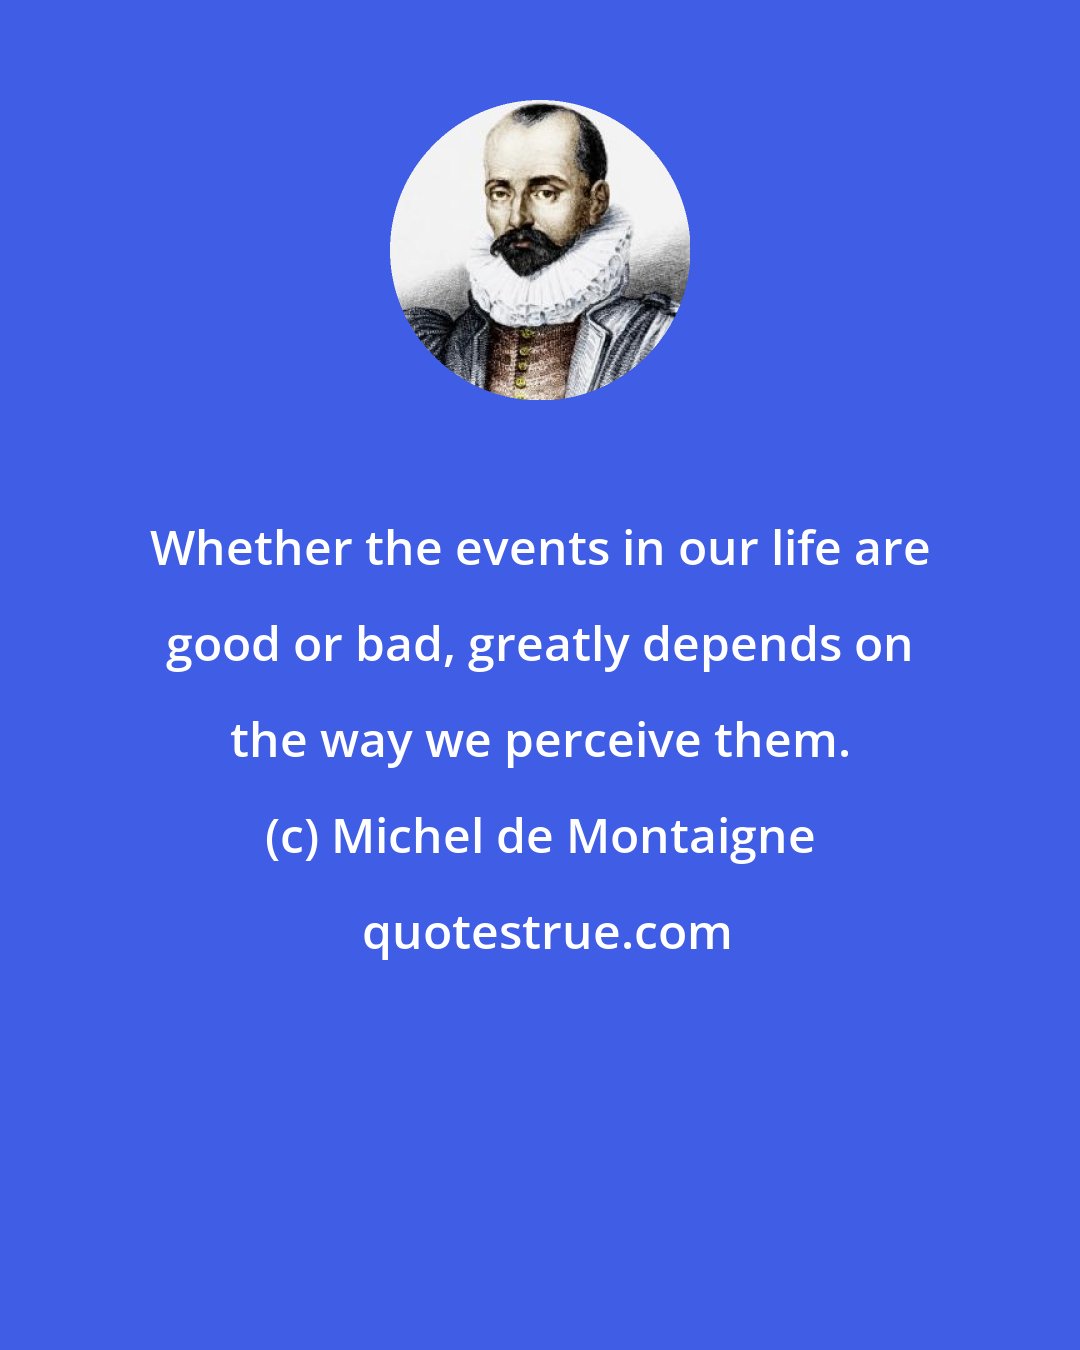 Michel de Montaigne: Whether the events in our life are good or bad, greatly depends on the way we perceive them.